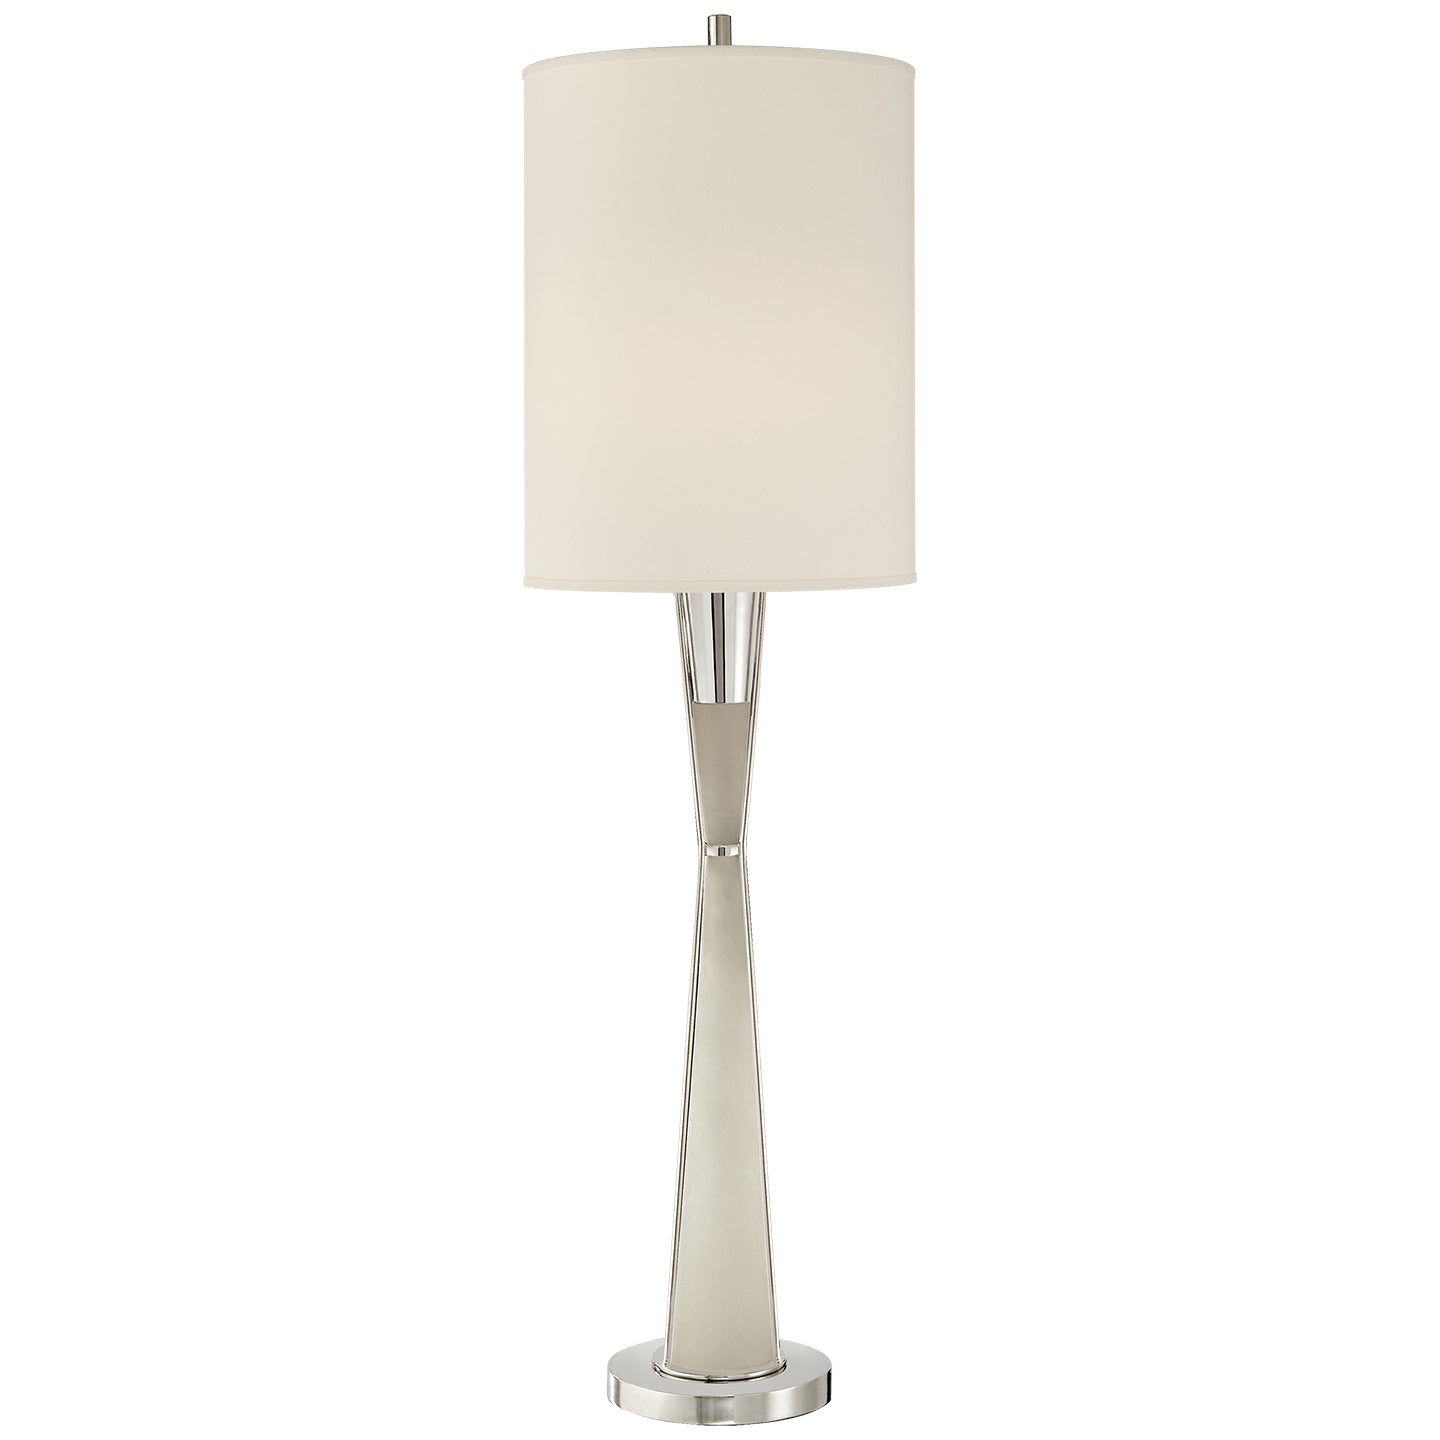 Load image into Gallery viewer, Visual Comfort Signature - TOB 3932PN/ALB-PL - One Light Buffet Lamp - Robinson - Polished Nickel
